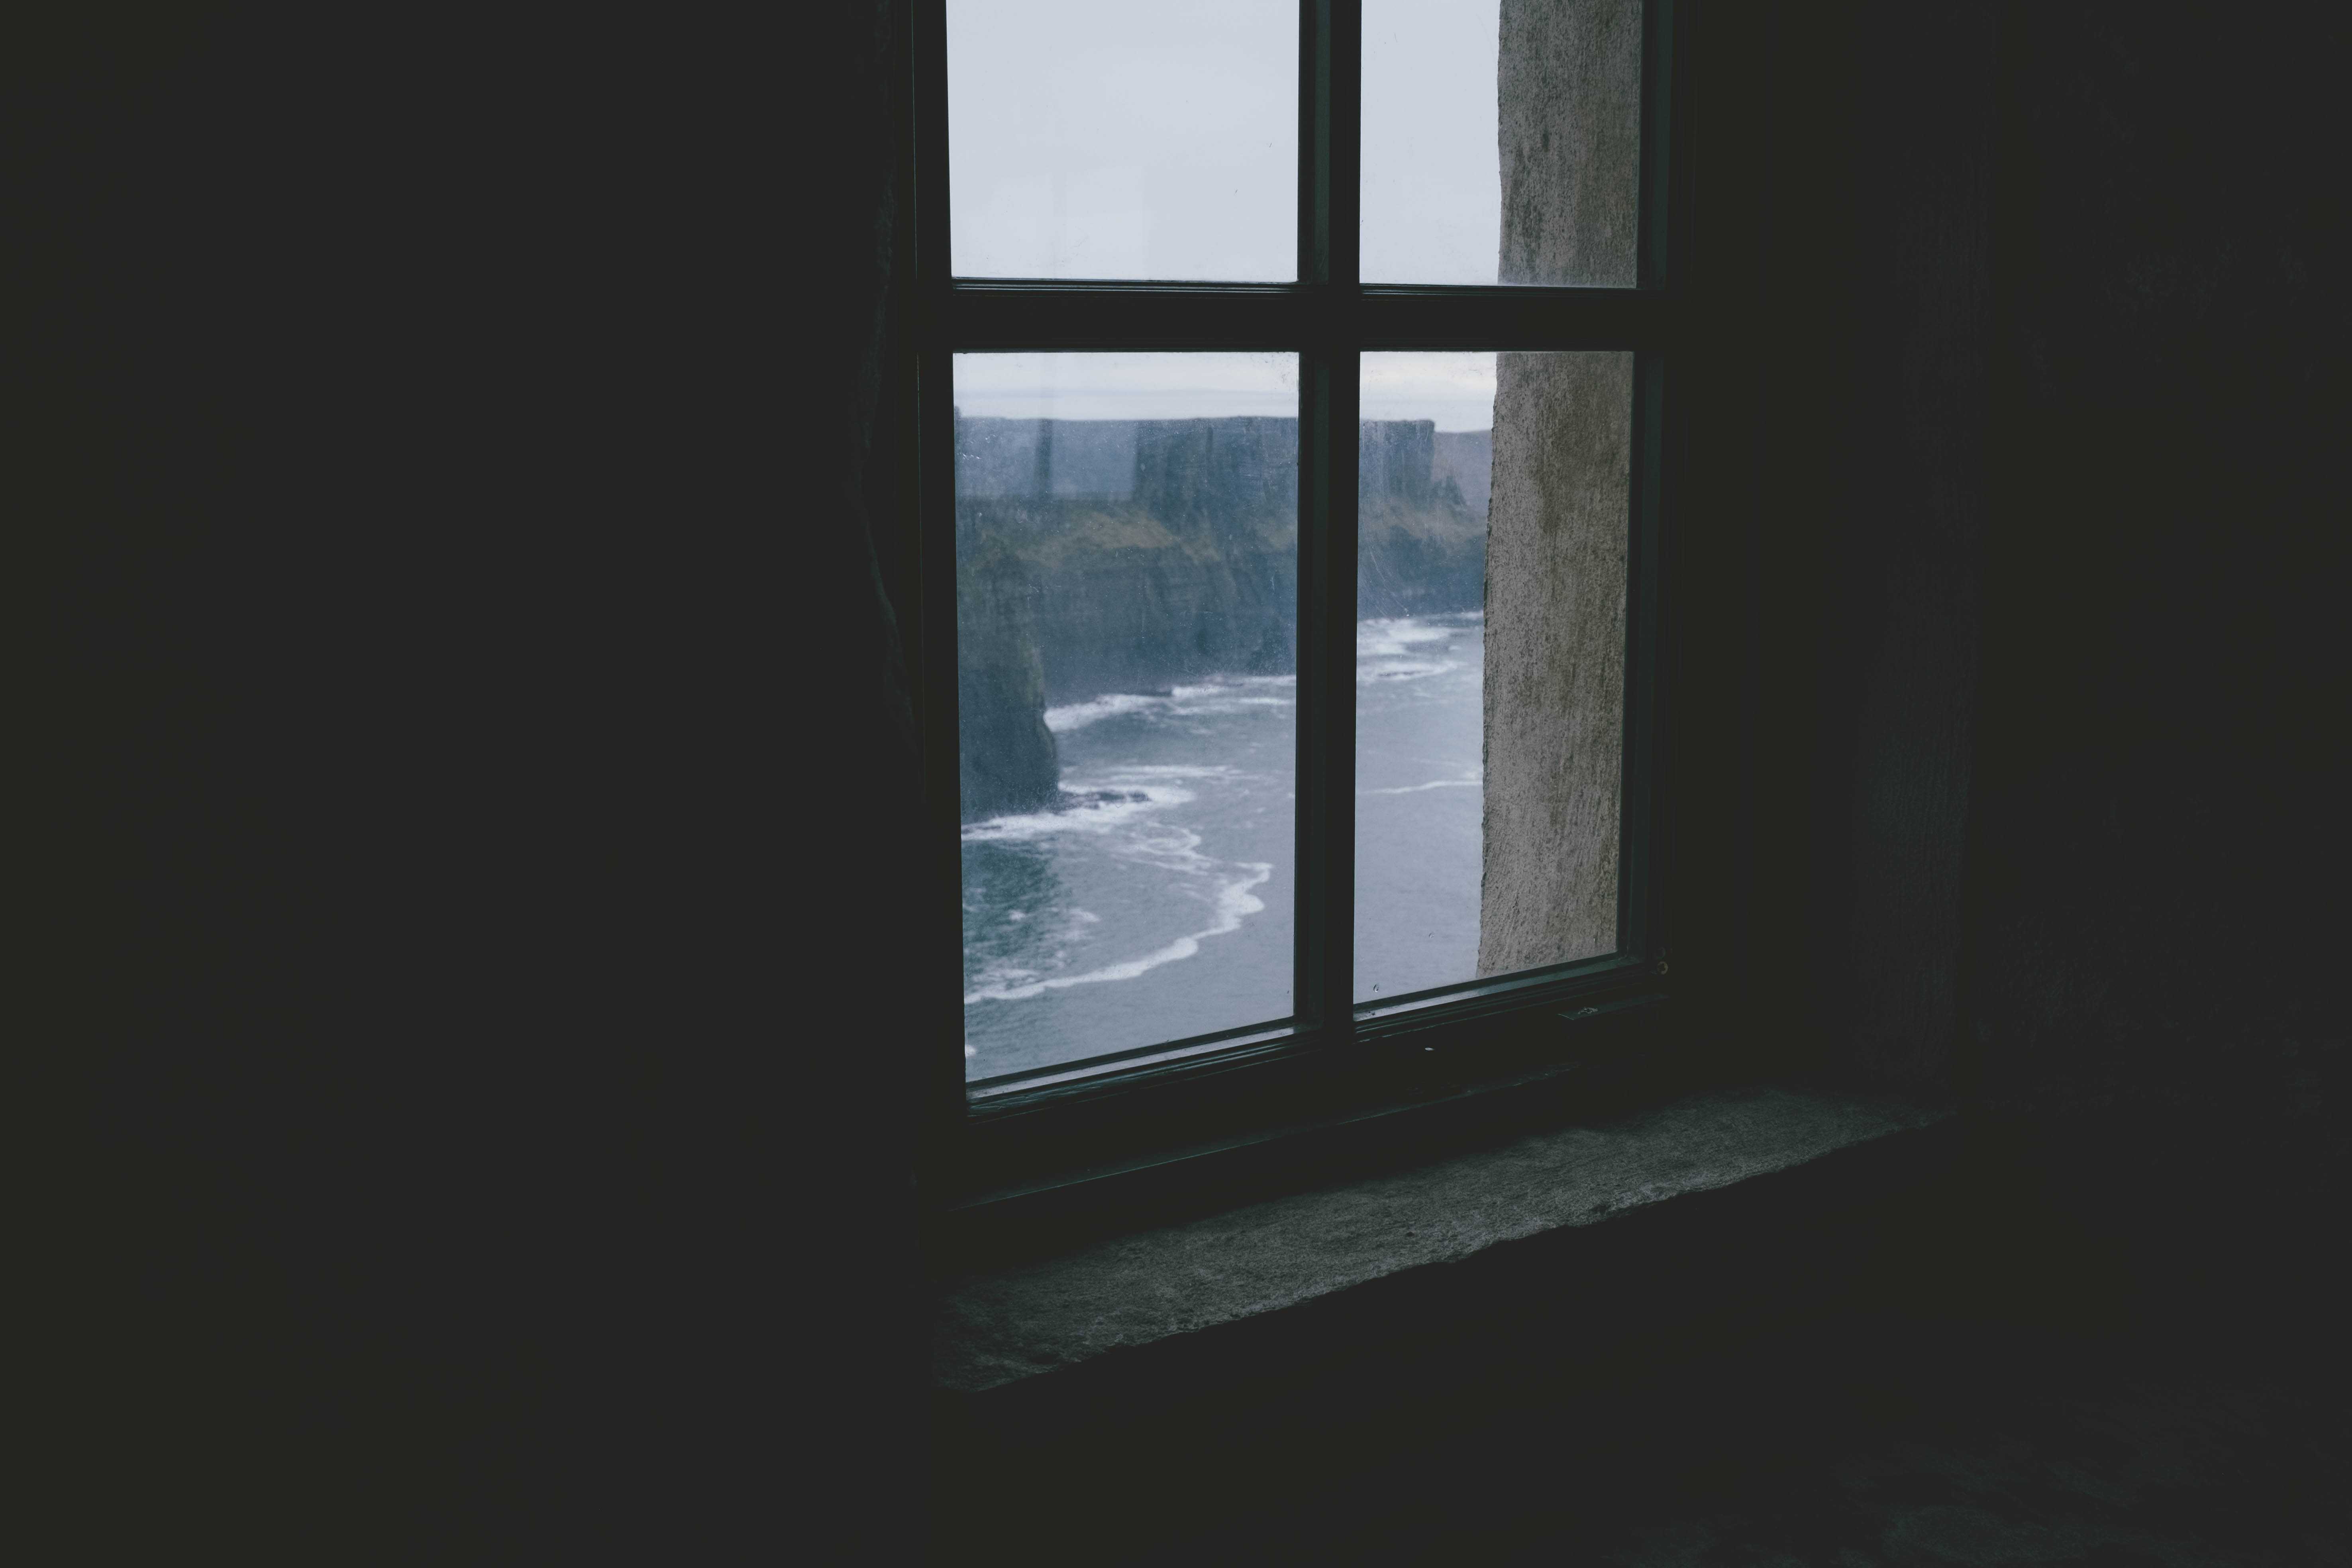 Look out at the cliffs from behind a window